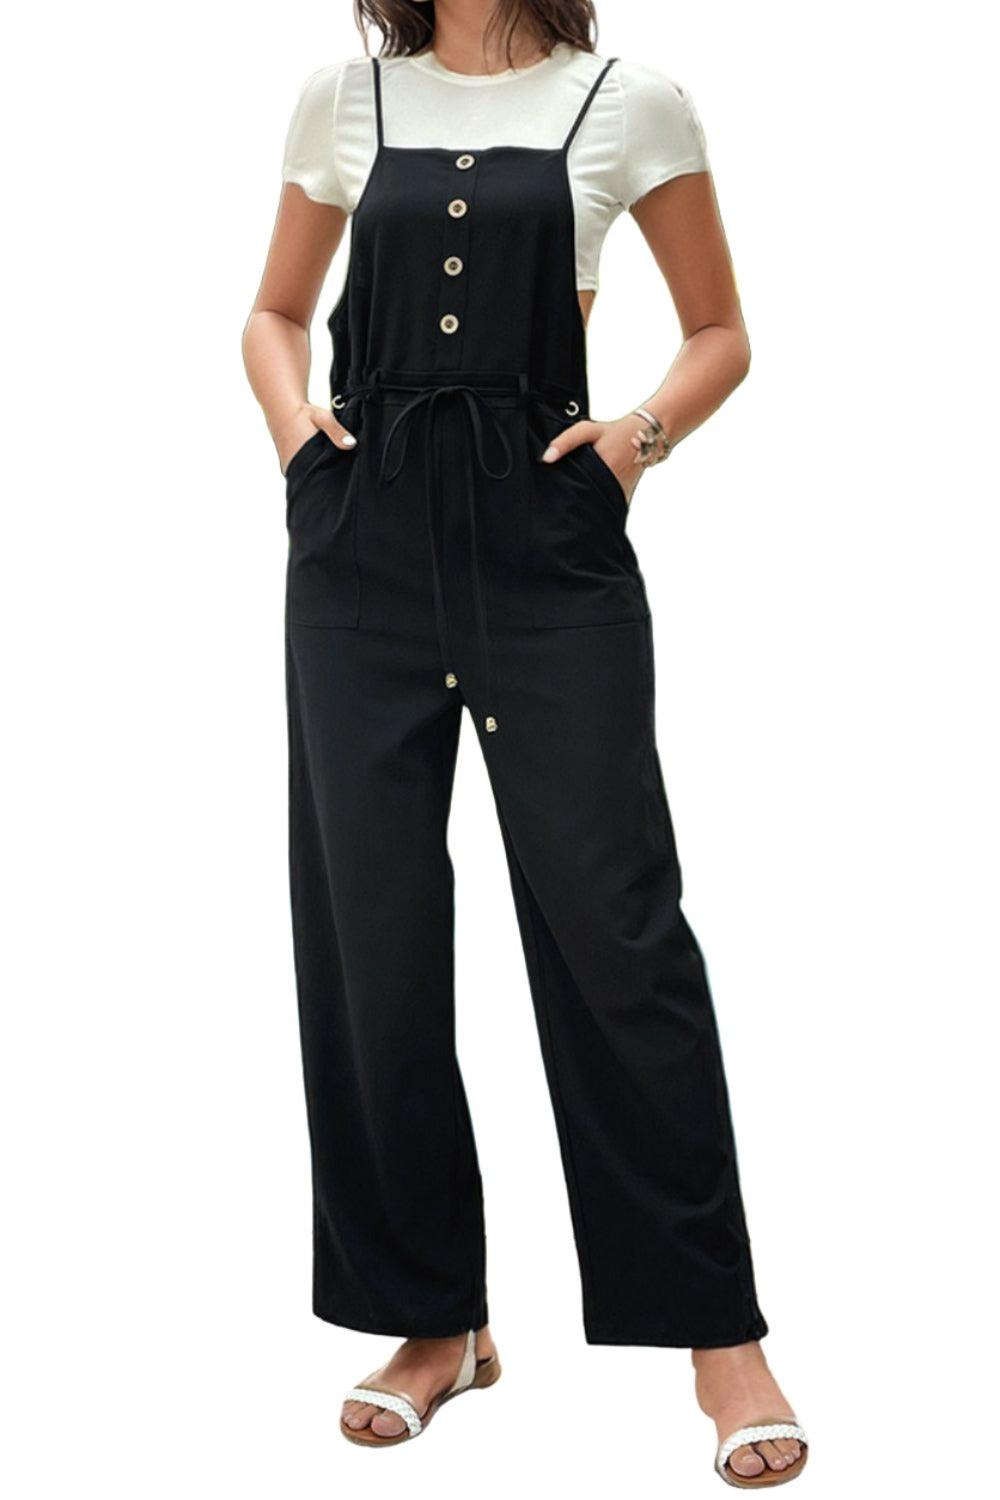 Jumpsuits & Rompers Tied Pocketed Spaghetti Strap Overalls